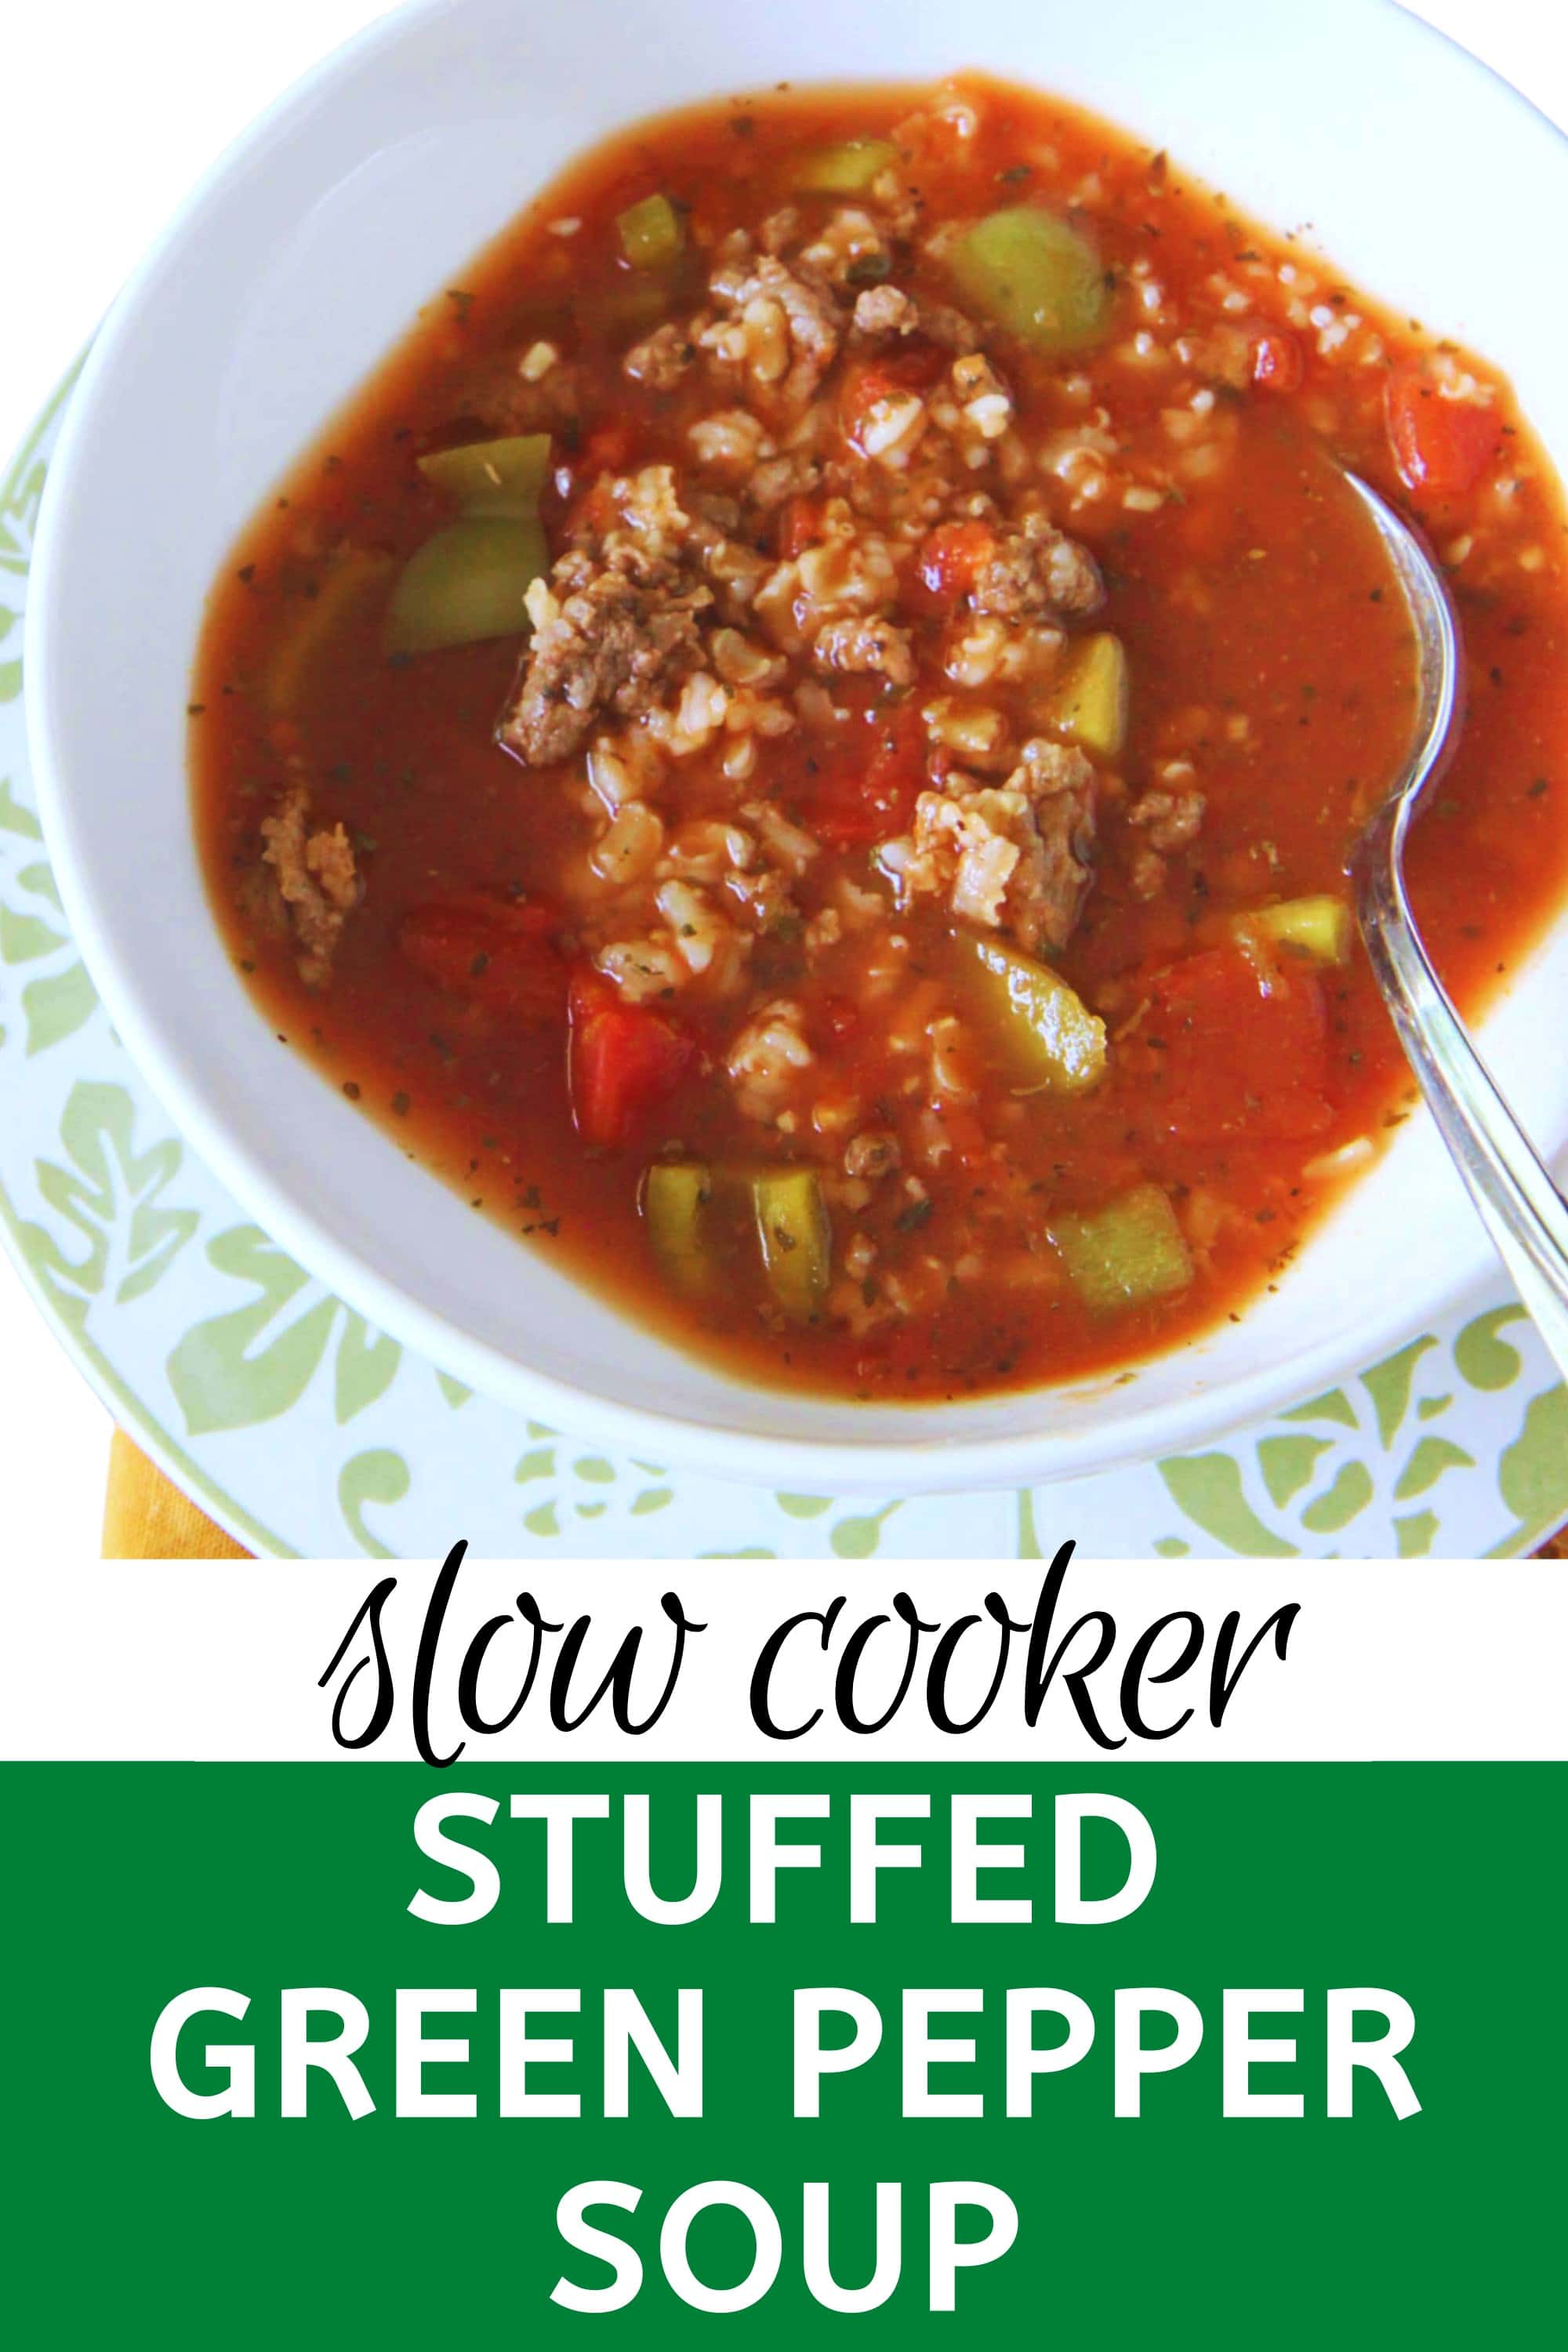 Slow Cooker Stuffed Green Pepper Soup from MomAdvice.com